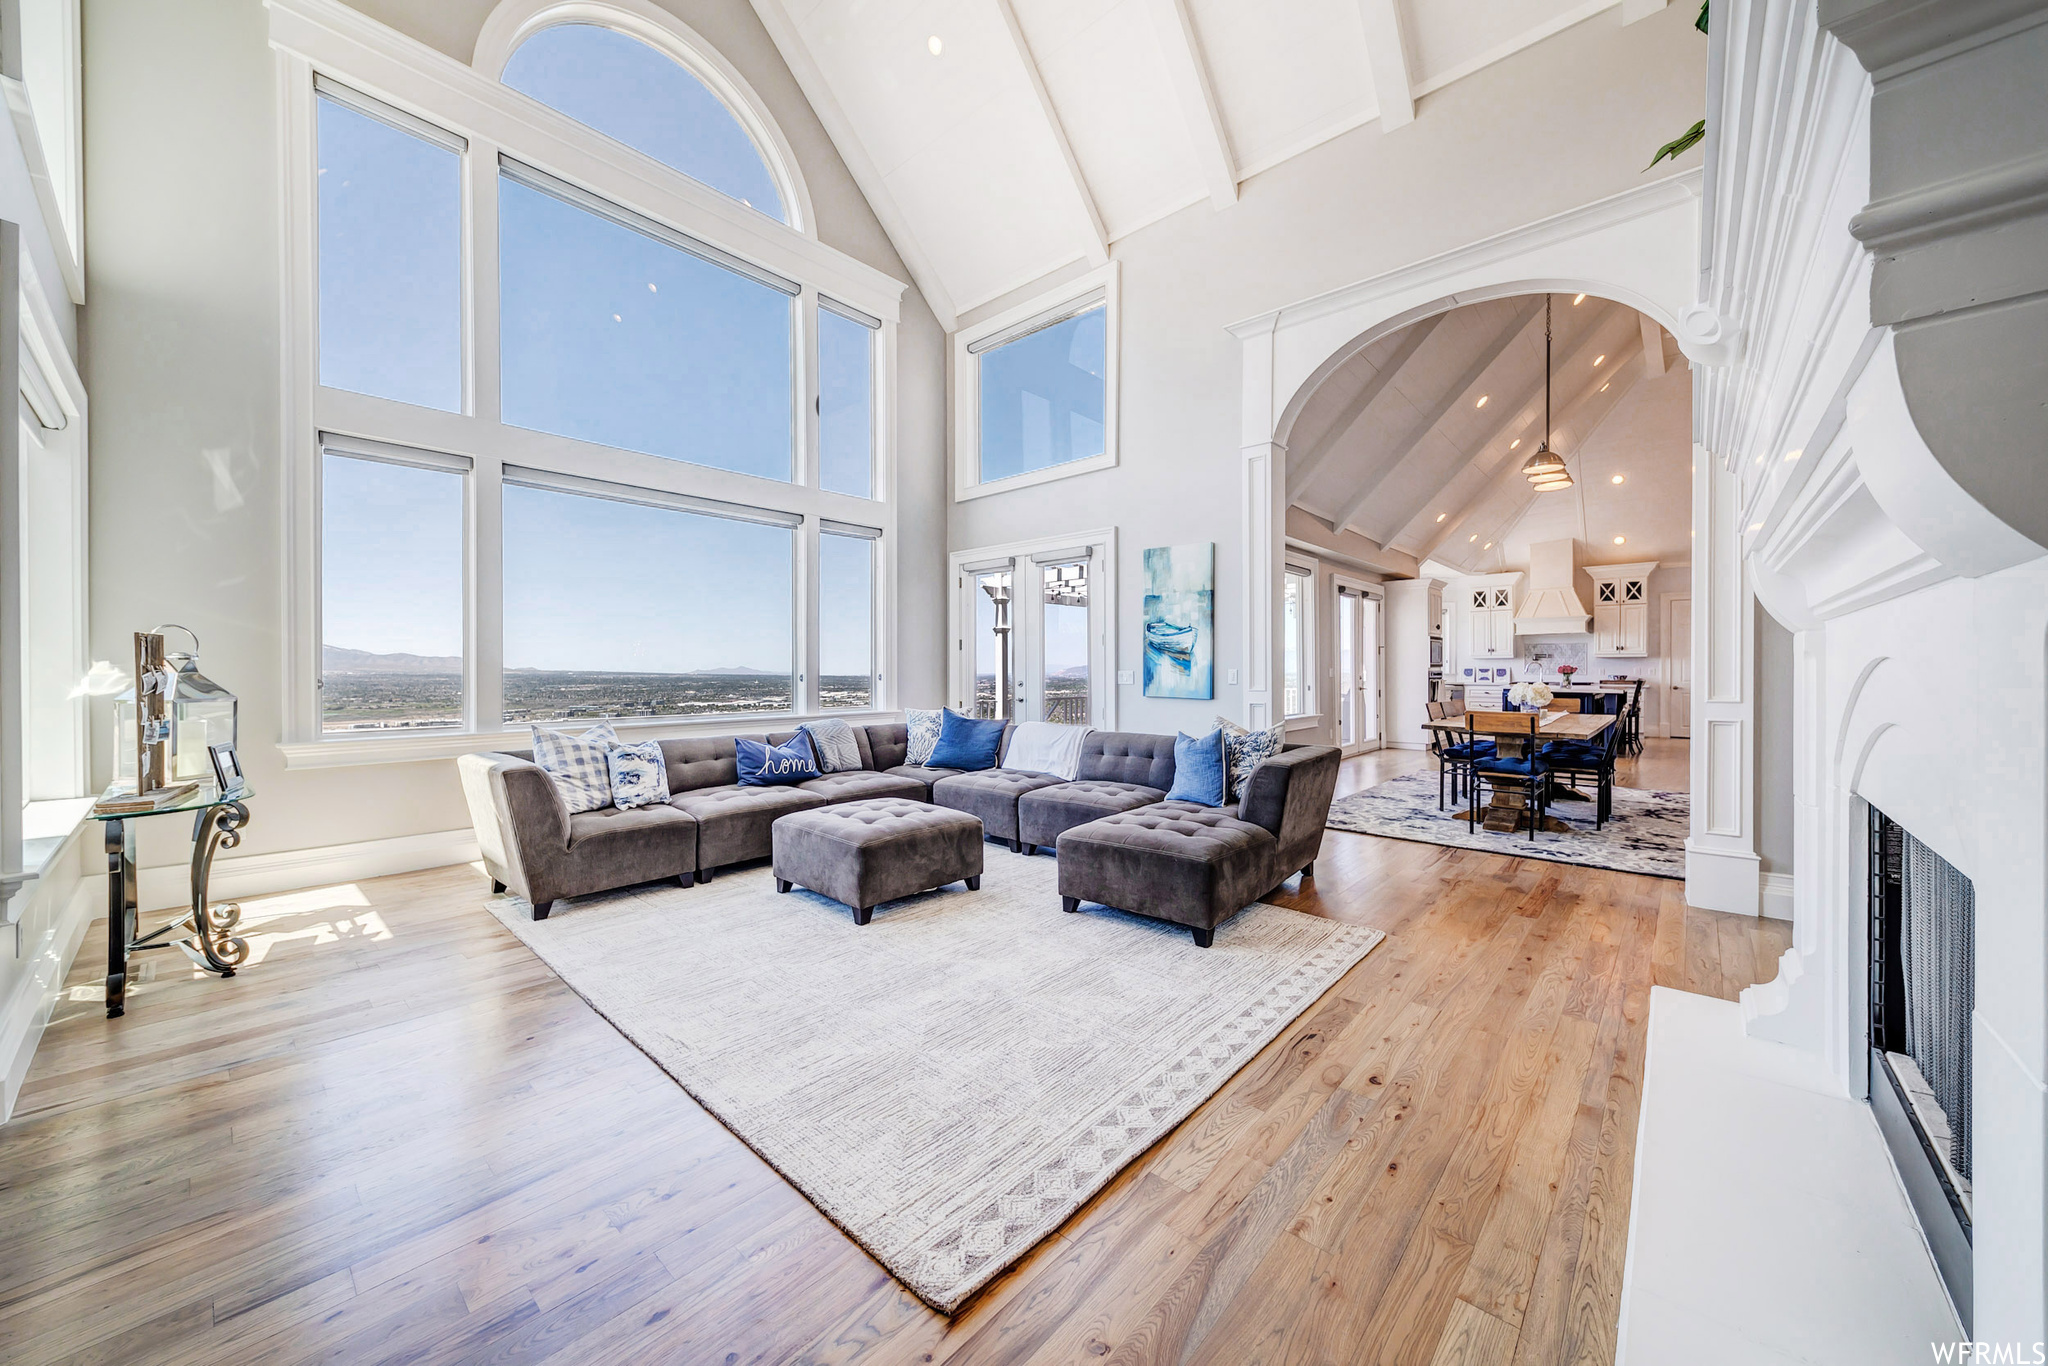 Living room with a high ceiling, light hardwood floors, lofted ceiling, a fireplace and an abundance of natural light that provide the panoramic views of the city and mountains.